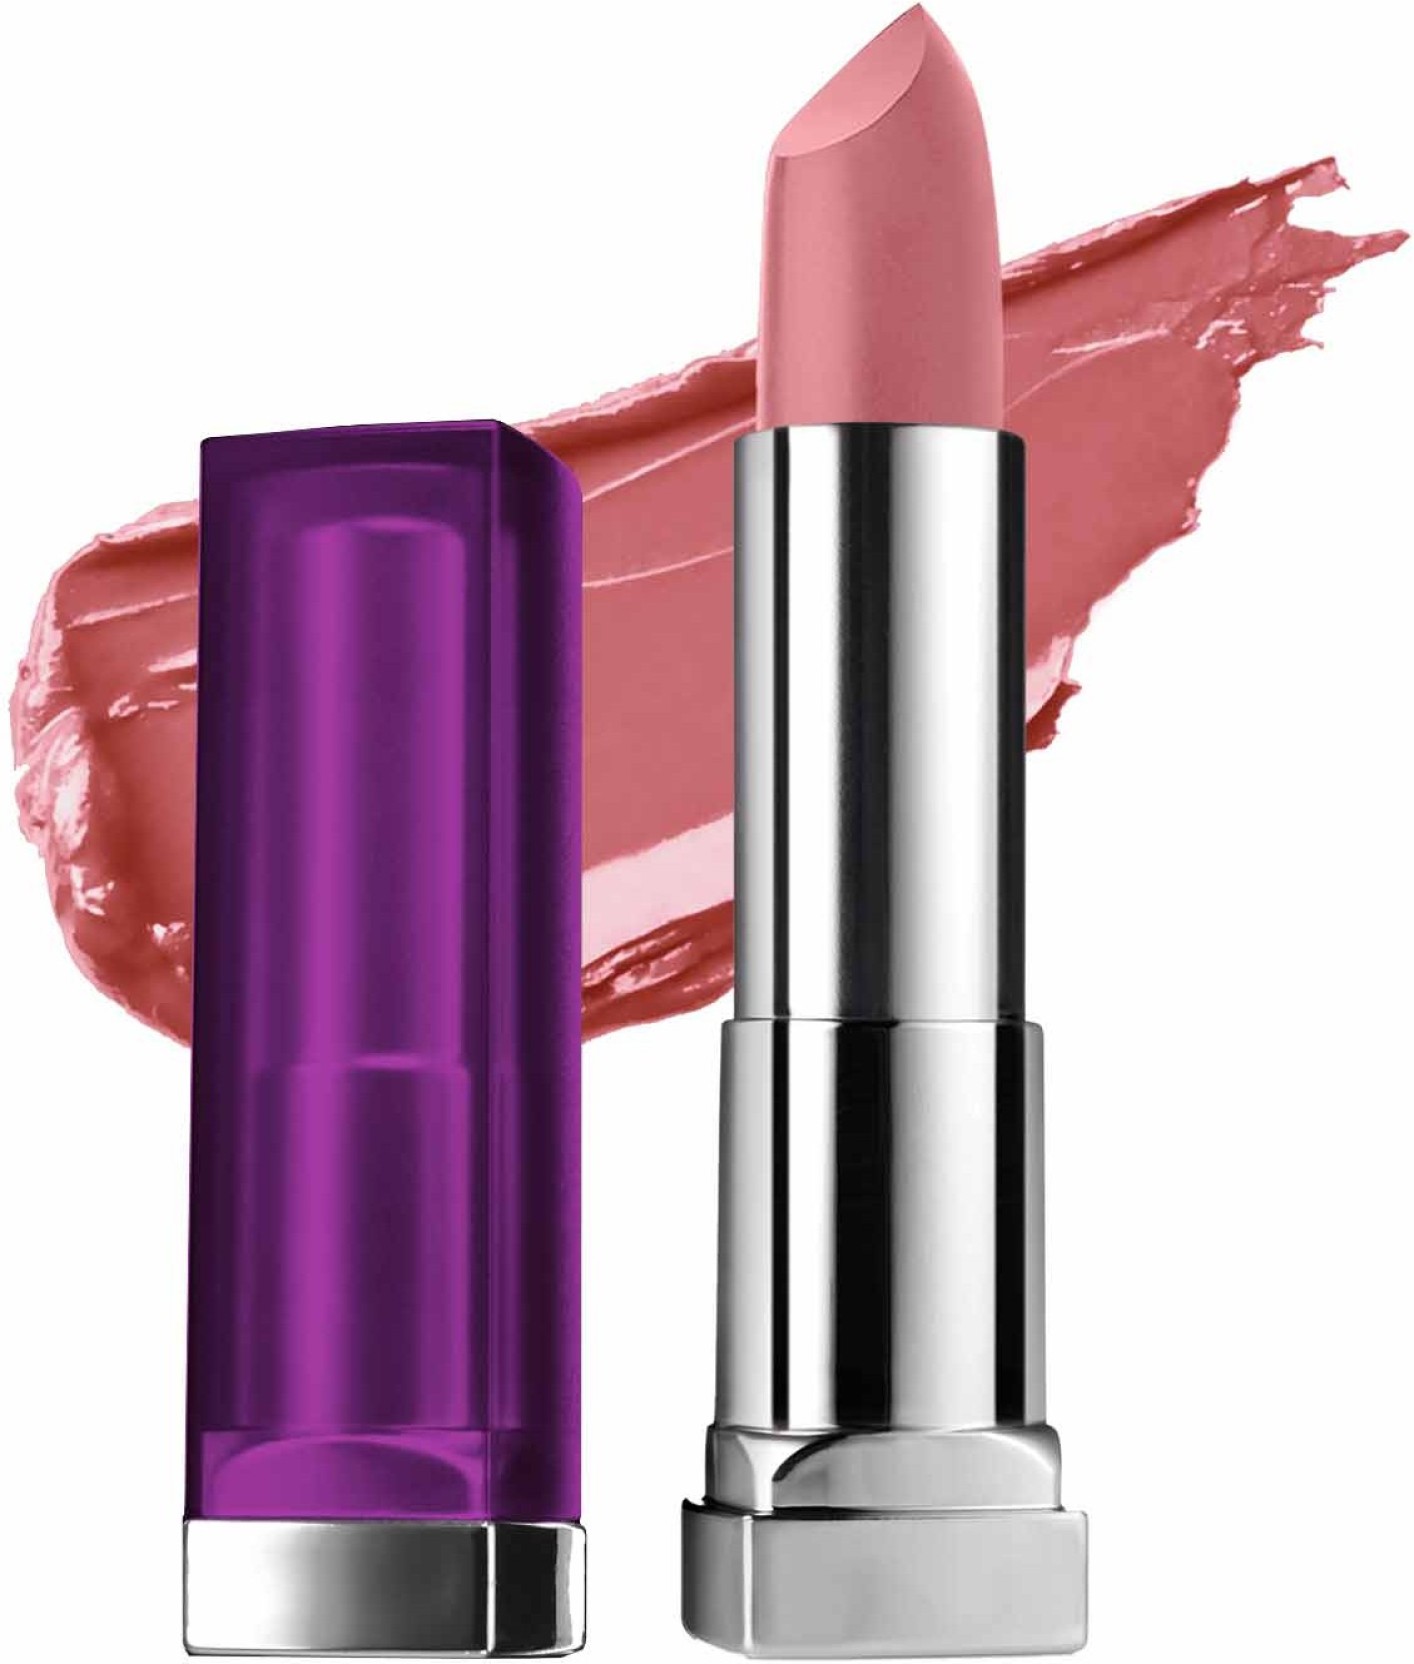 Maybelline Color Sensational Lipstick Reviews, Price, Benefits How To